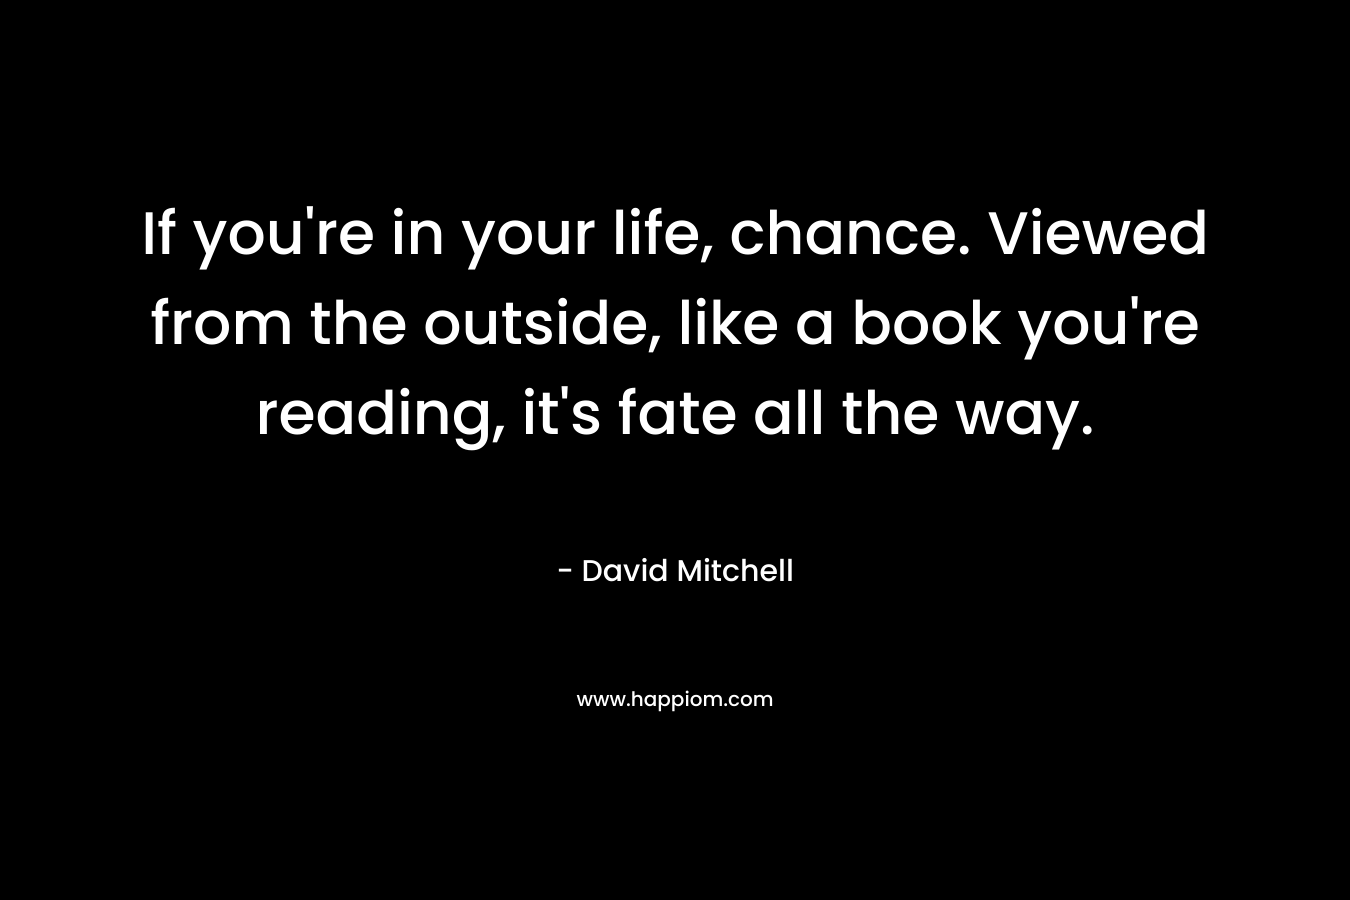 If you're in your life, chance. Viewed from the outside, like a book you're reading, it's fate all the way.